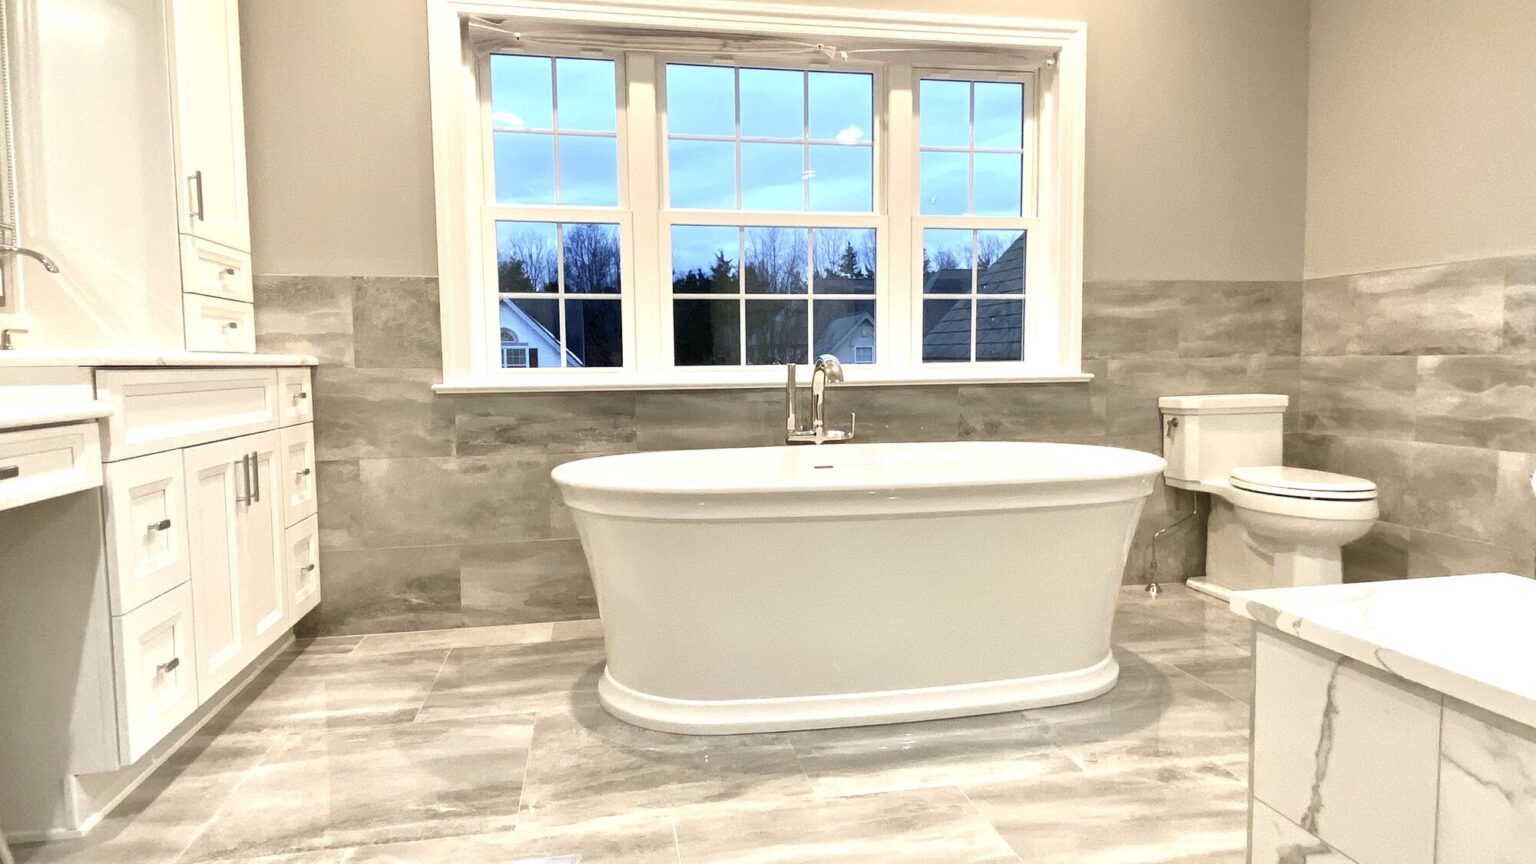 Are you looking to upgrade your home and to modernize your bathroom along the way? Remodel your bathroom like a celebrity with these helpful hints.